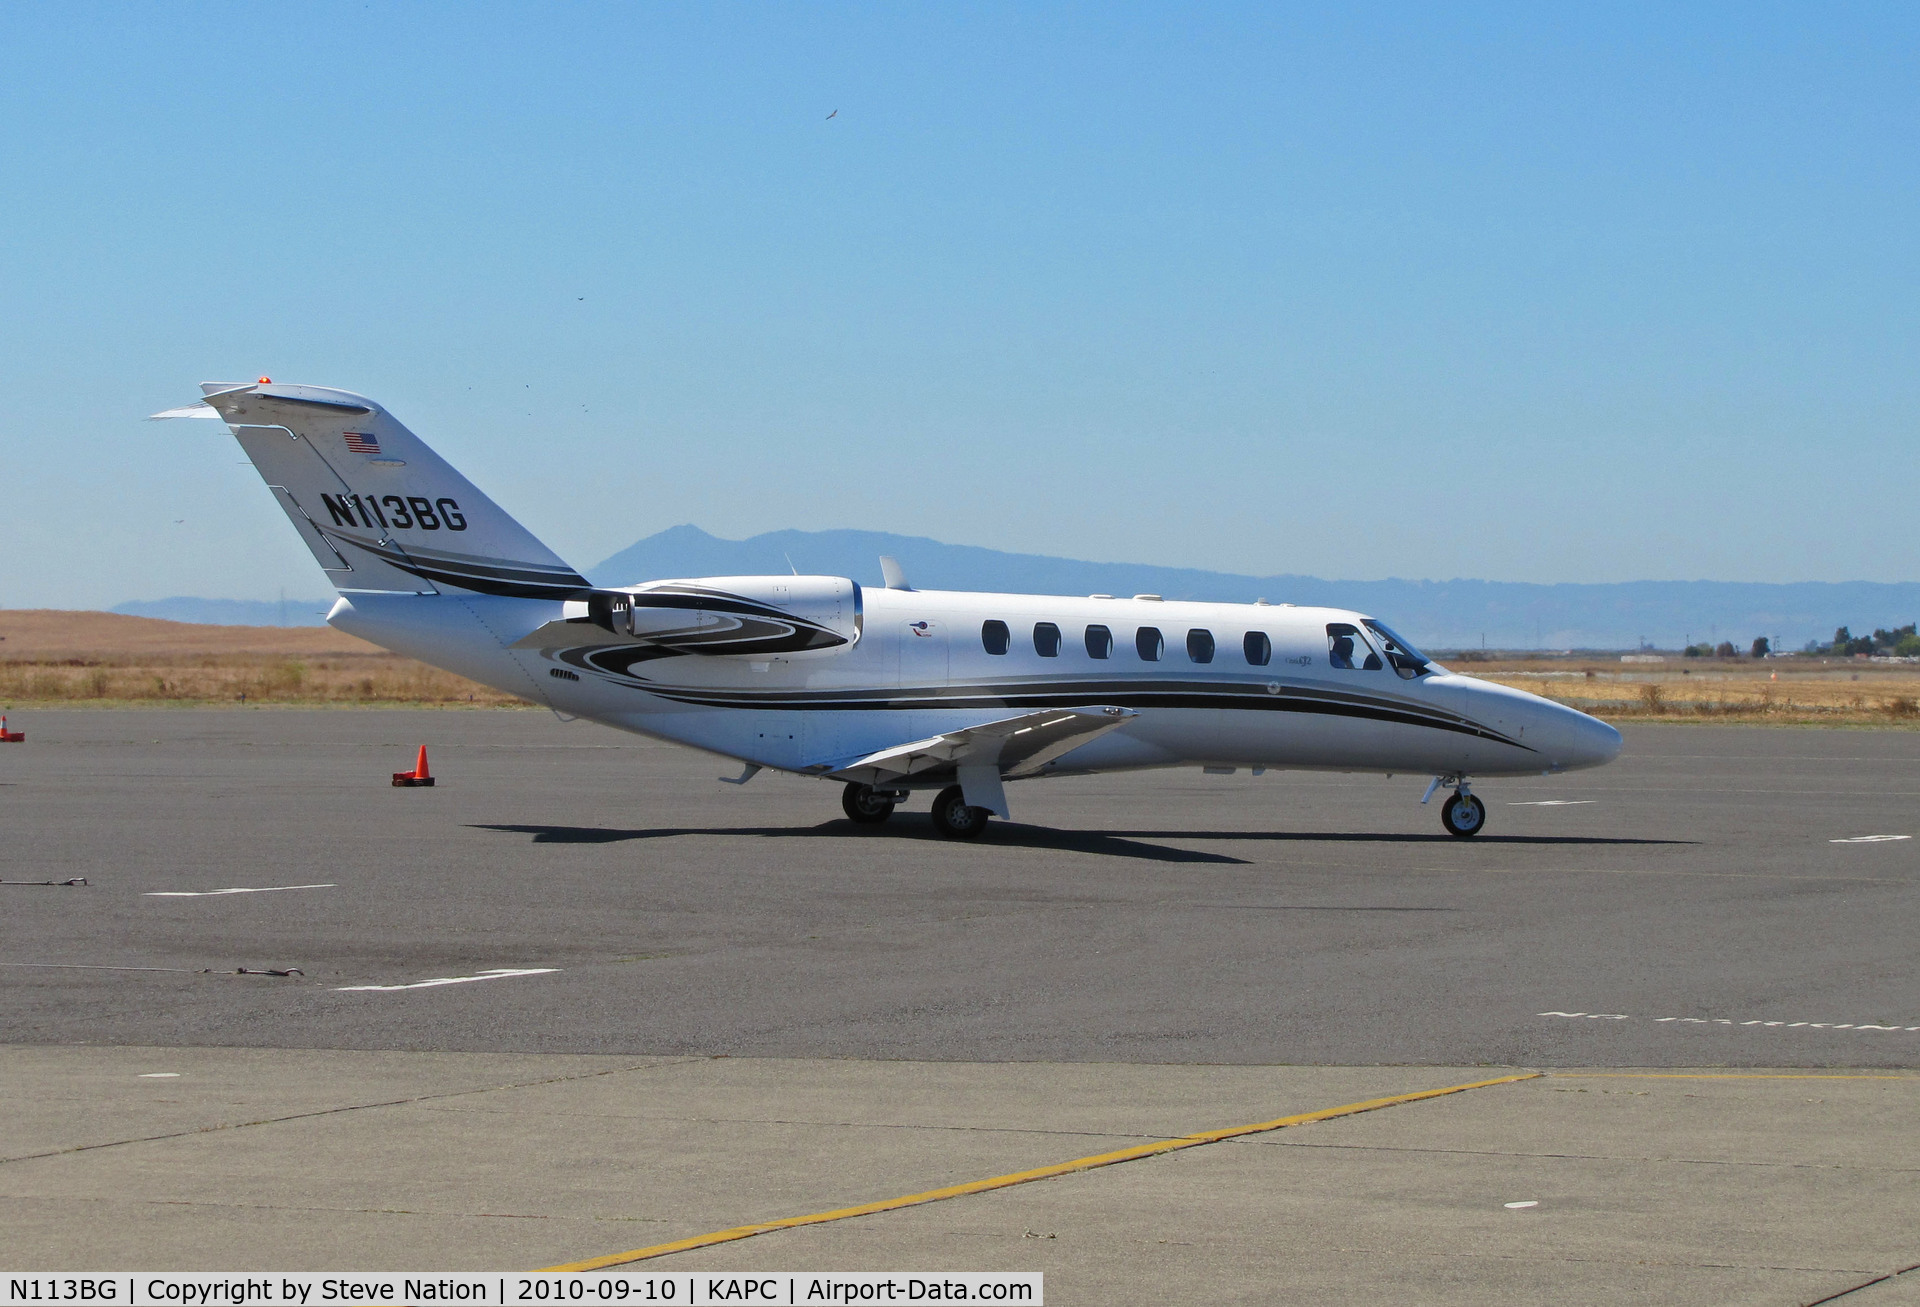 N113BG, 2002 Cessna 525A CitationJet CJ2 C/N 525A-0078, 7G's Aviation 2002 Cessna 525A after quick turn around leaving for KBFL Bakersfield Meadows Fld, CA